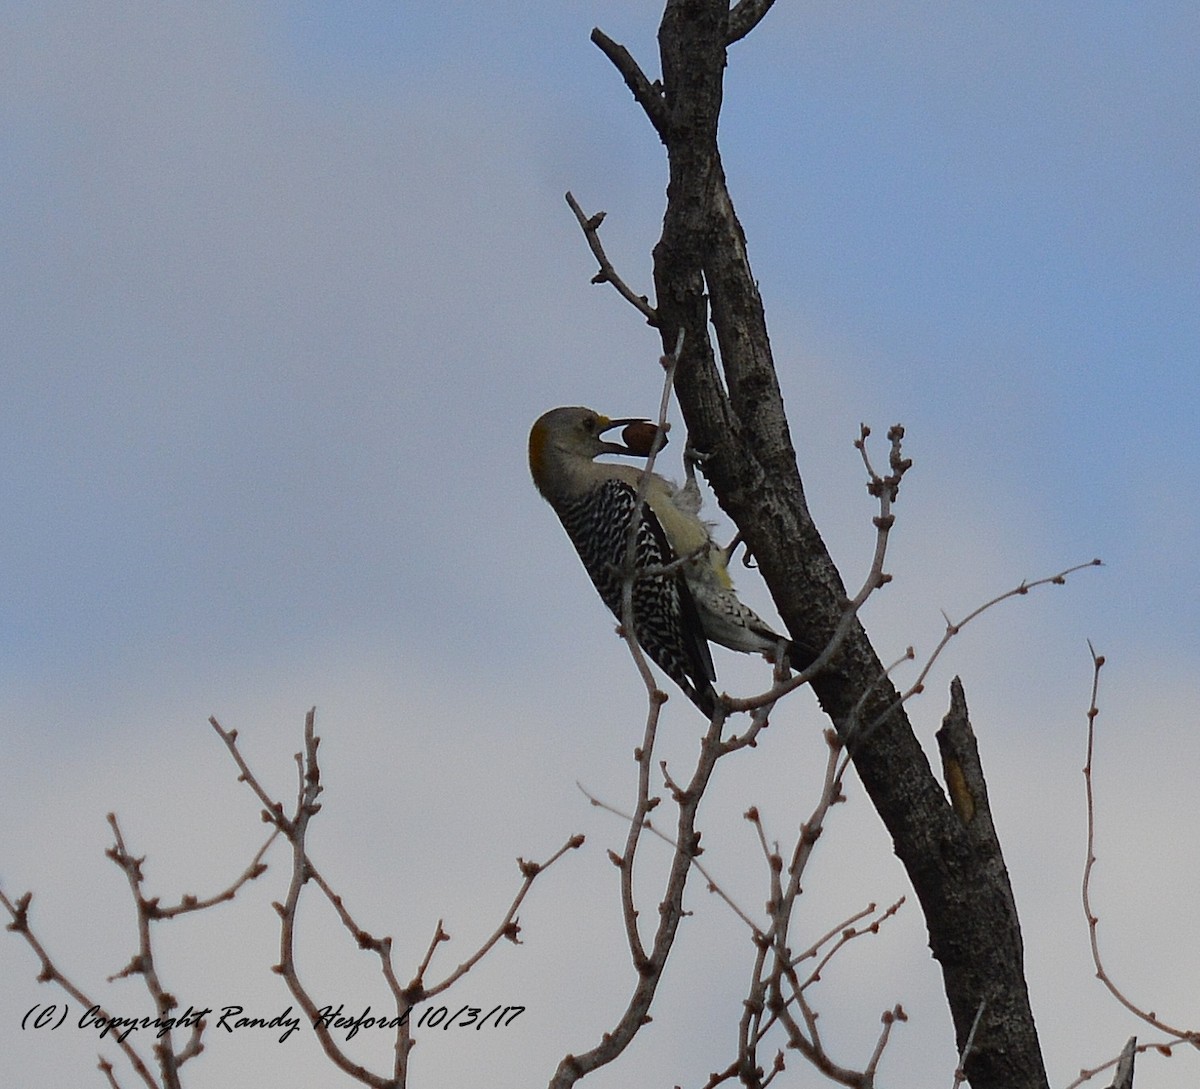 Golden-fronted Woodpecker - Randy Hesford